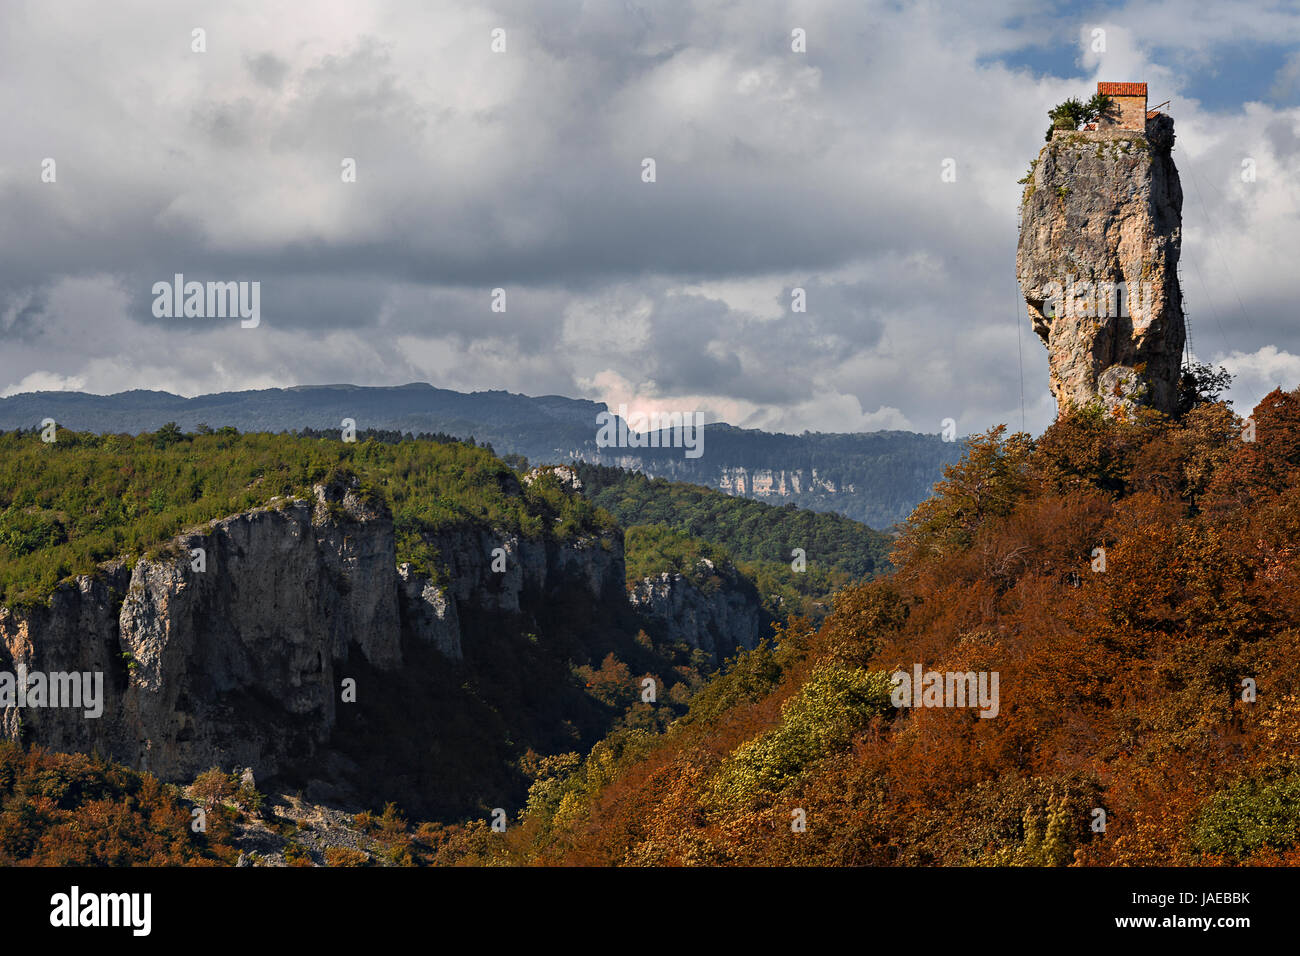 Monolithic rock formation known as Katskhi Pillar with a monk's cell on the top, in Georgia. Stock Photo